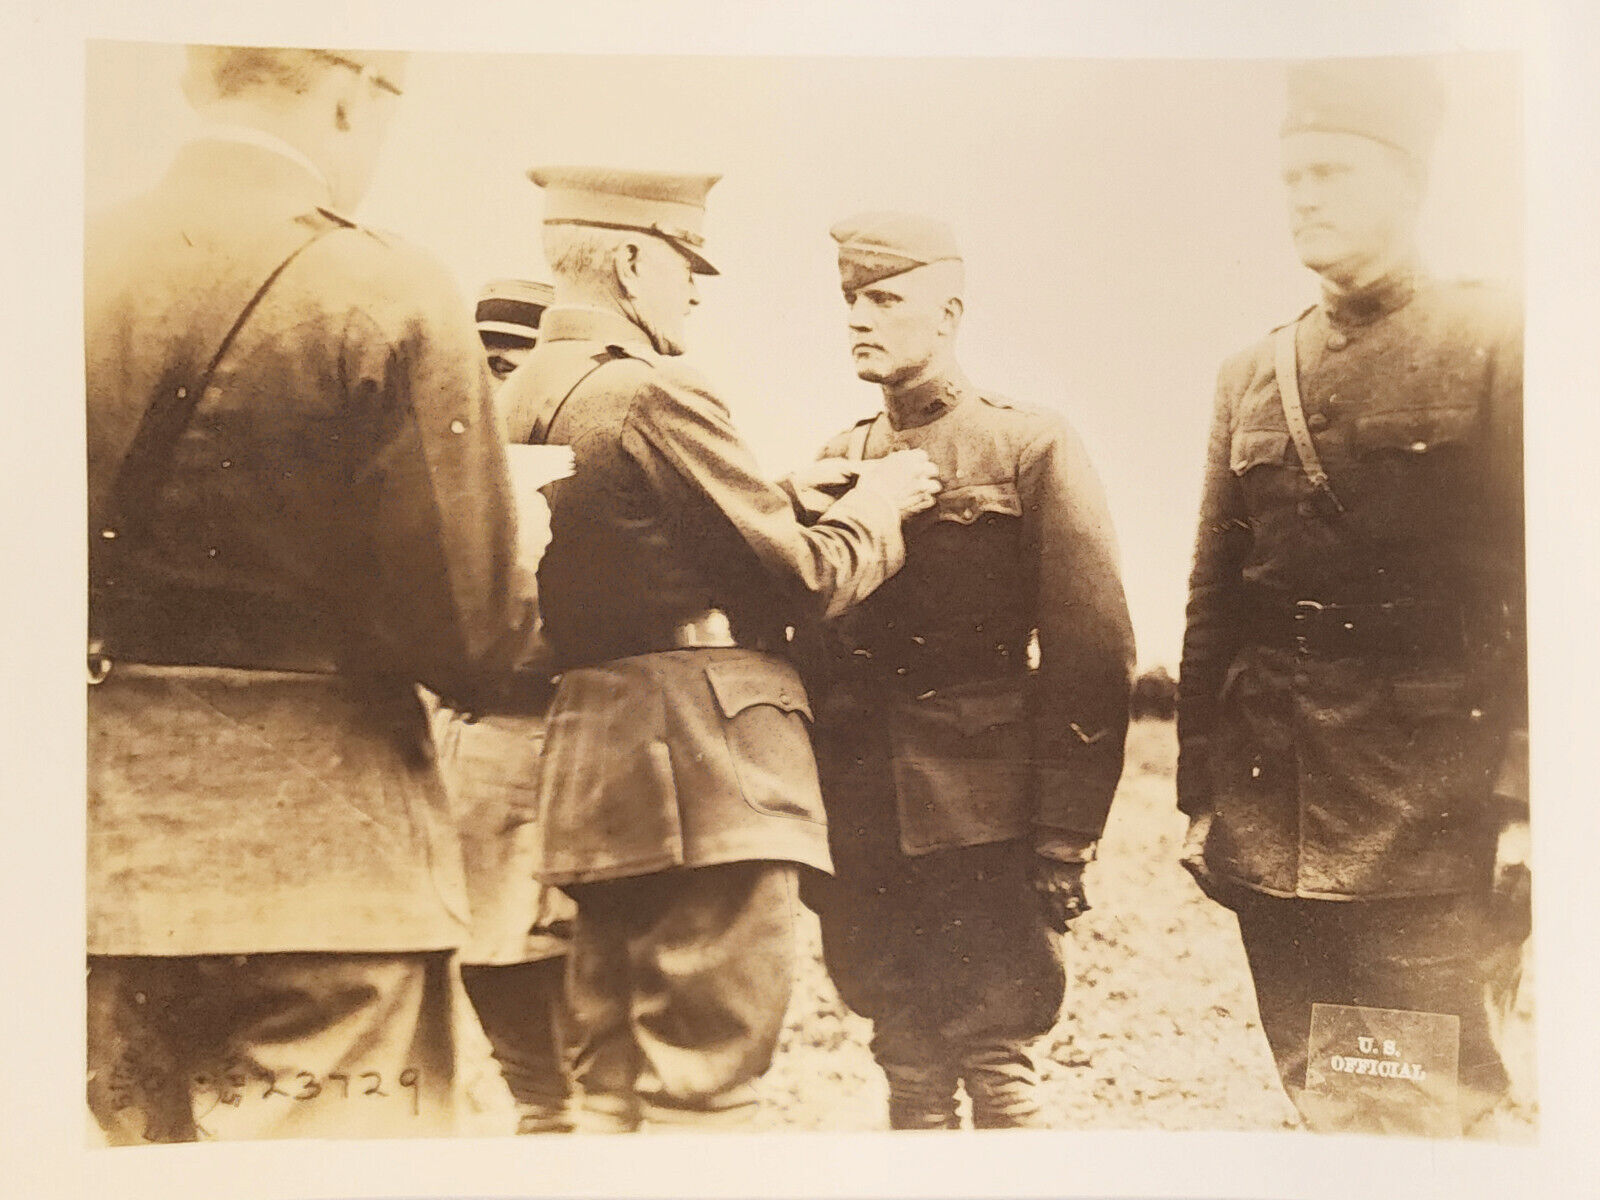 WW1 US Signal Corps Photo of Gen. Pershing Pinning a Medal on a Soldier